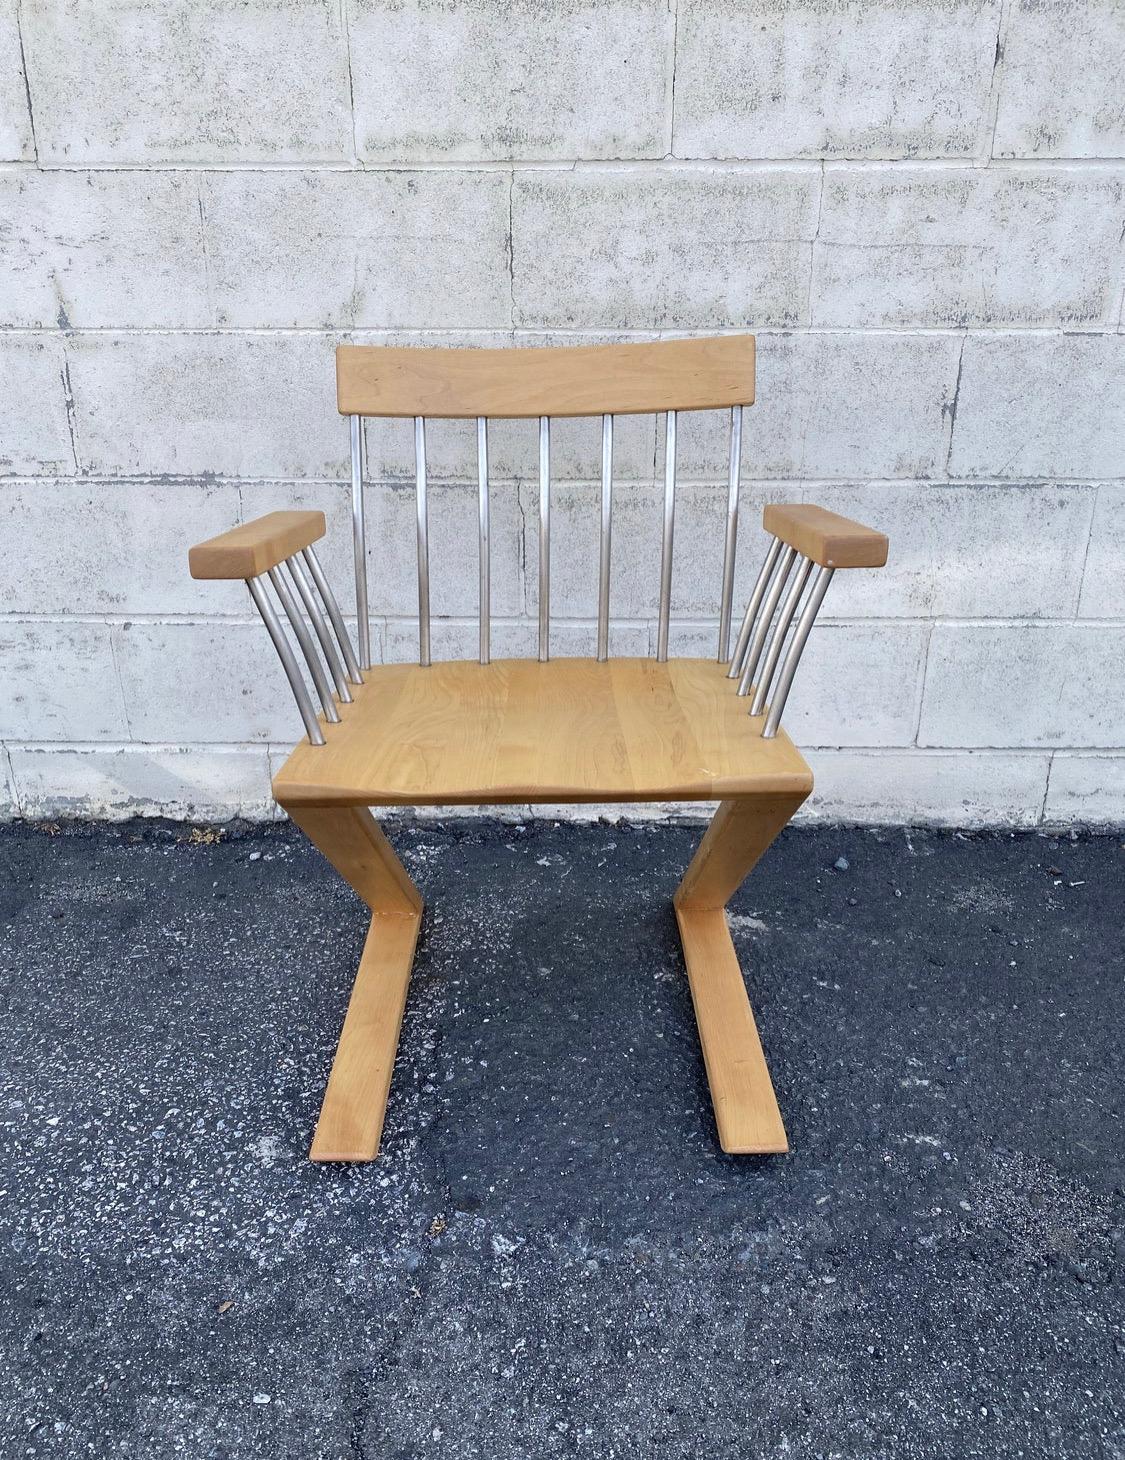 Fantastic Modern chair with Z frame. This one of a kind Z-Chair will make an incredible side chair that will be the center of attention in your house and a conversation starter for sure !

This chair is in excellent structural shape but comes with